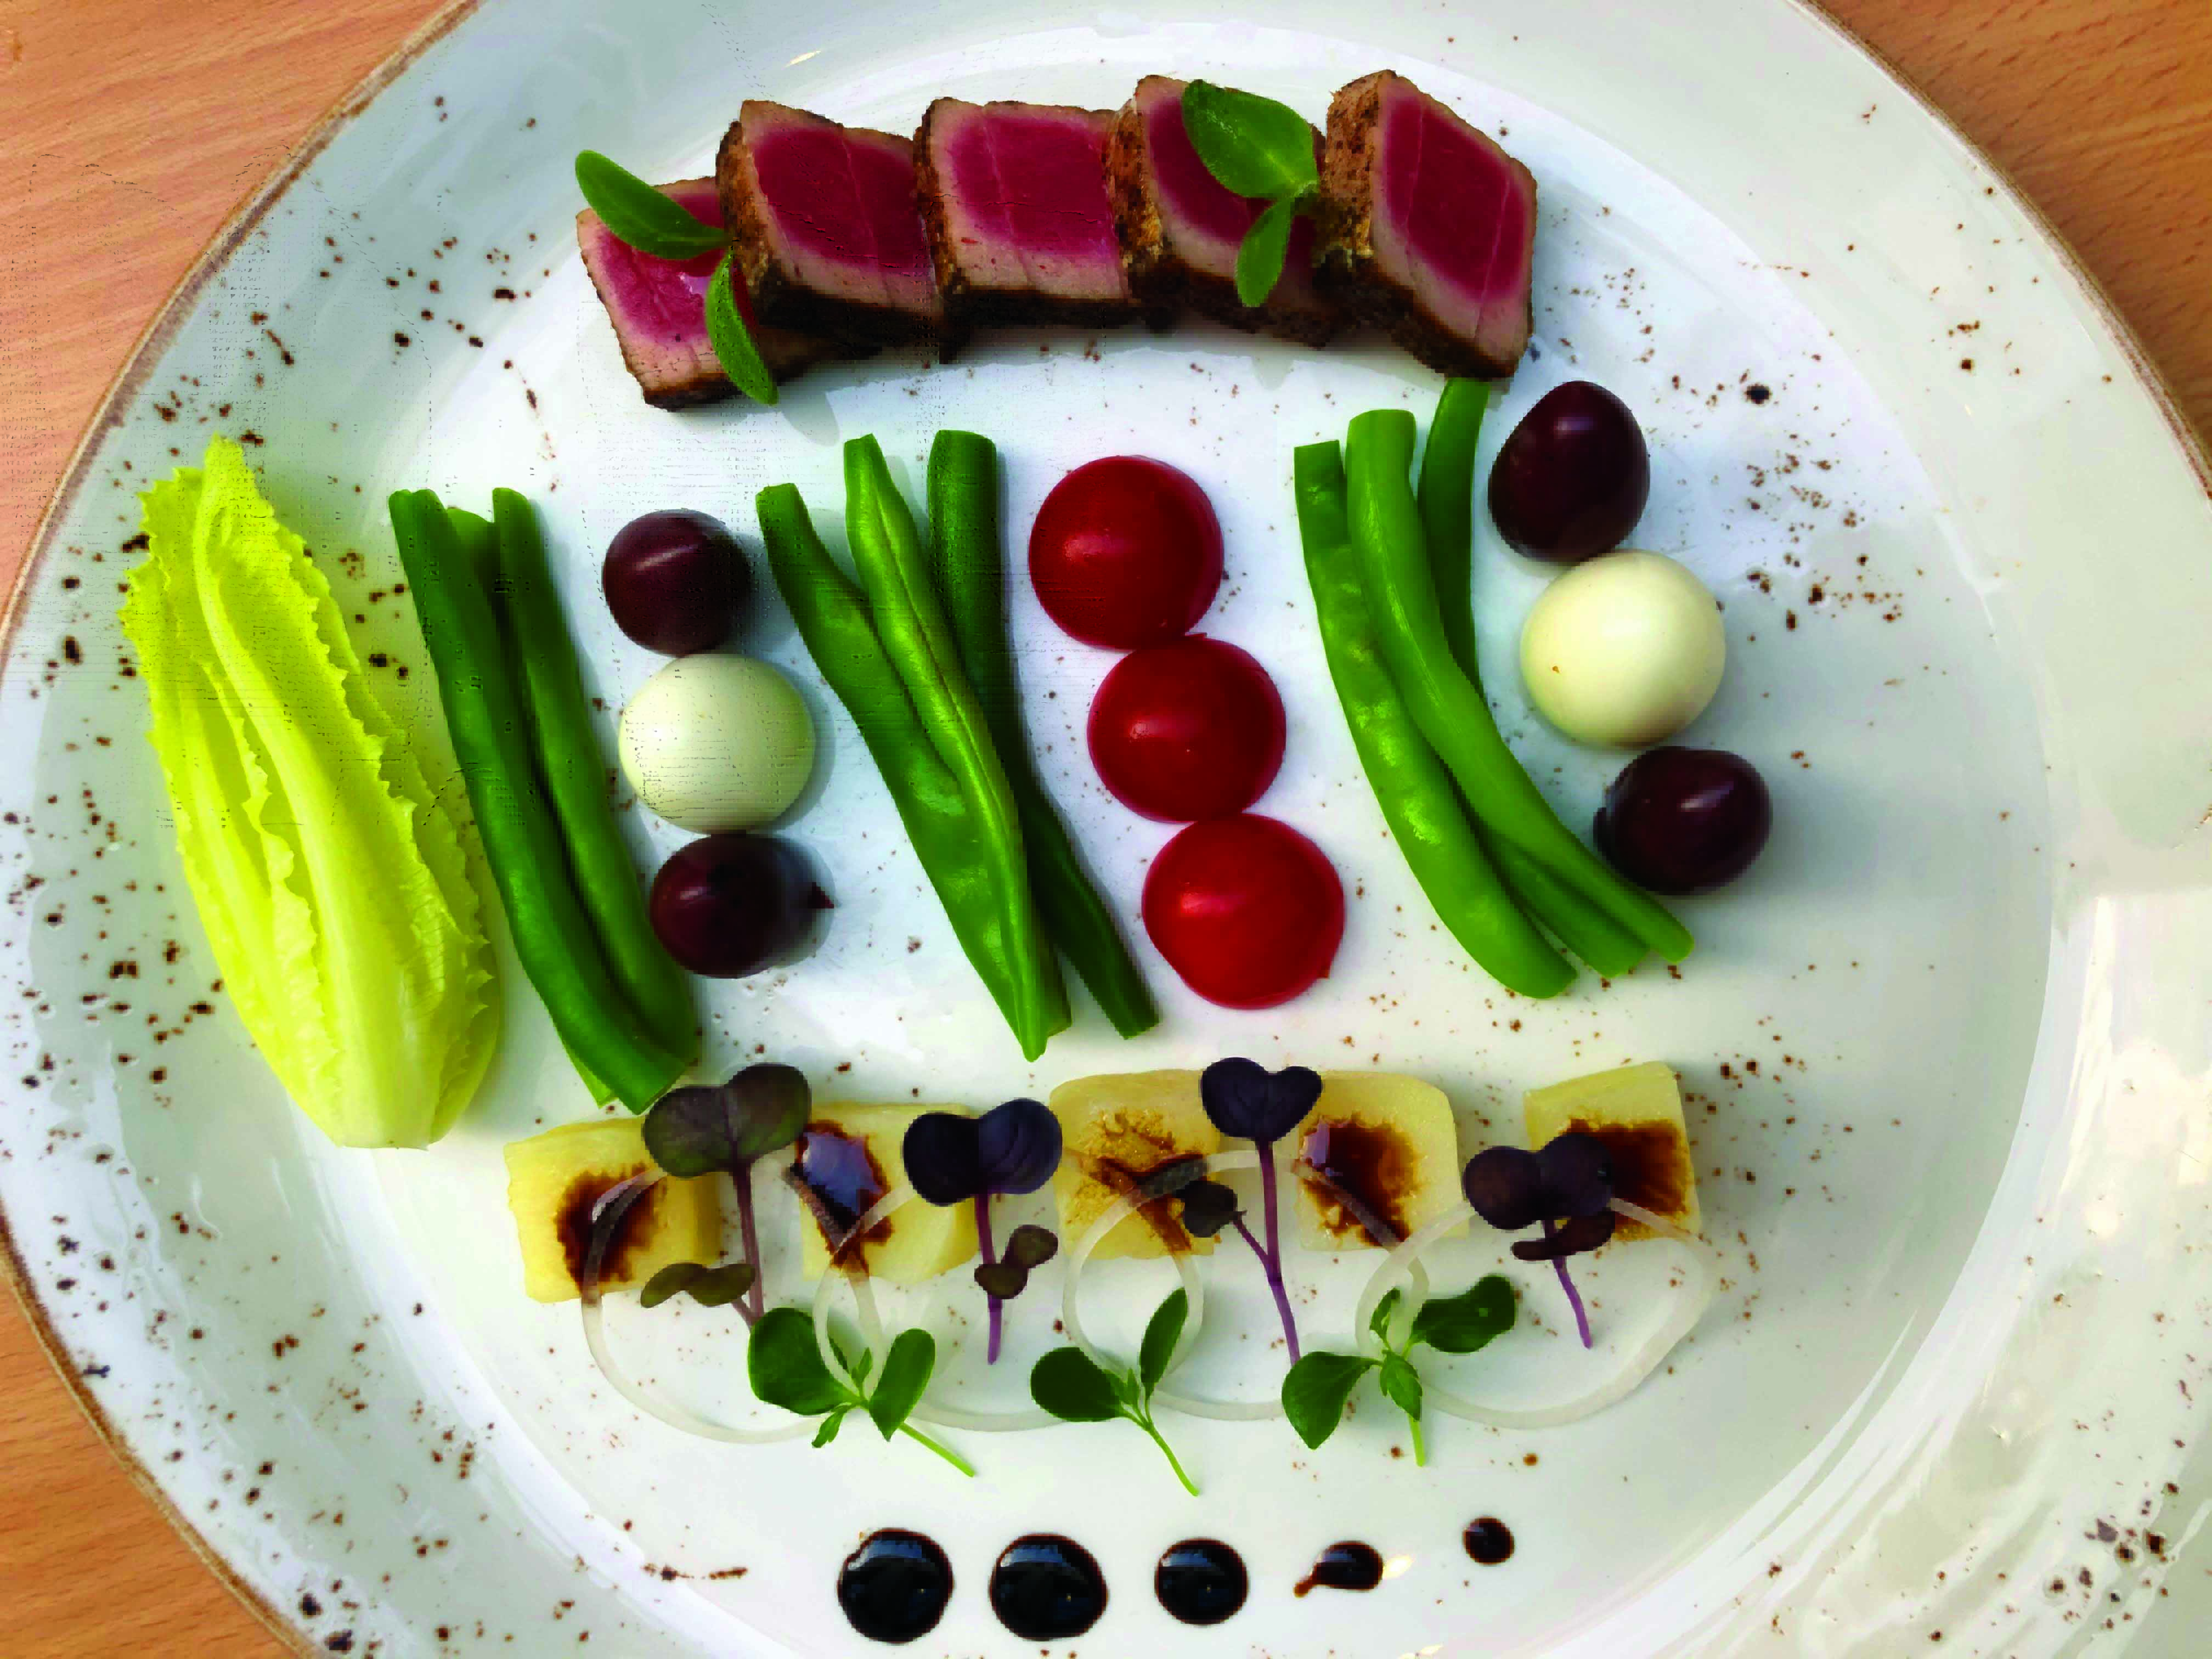 Nicoise salad revisited